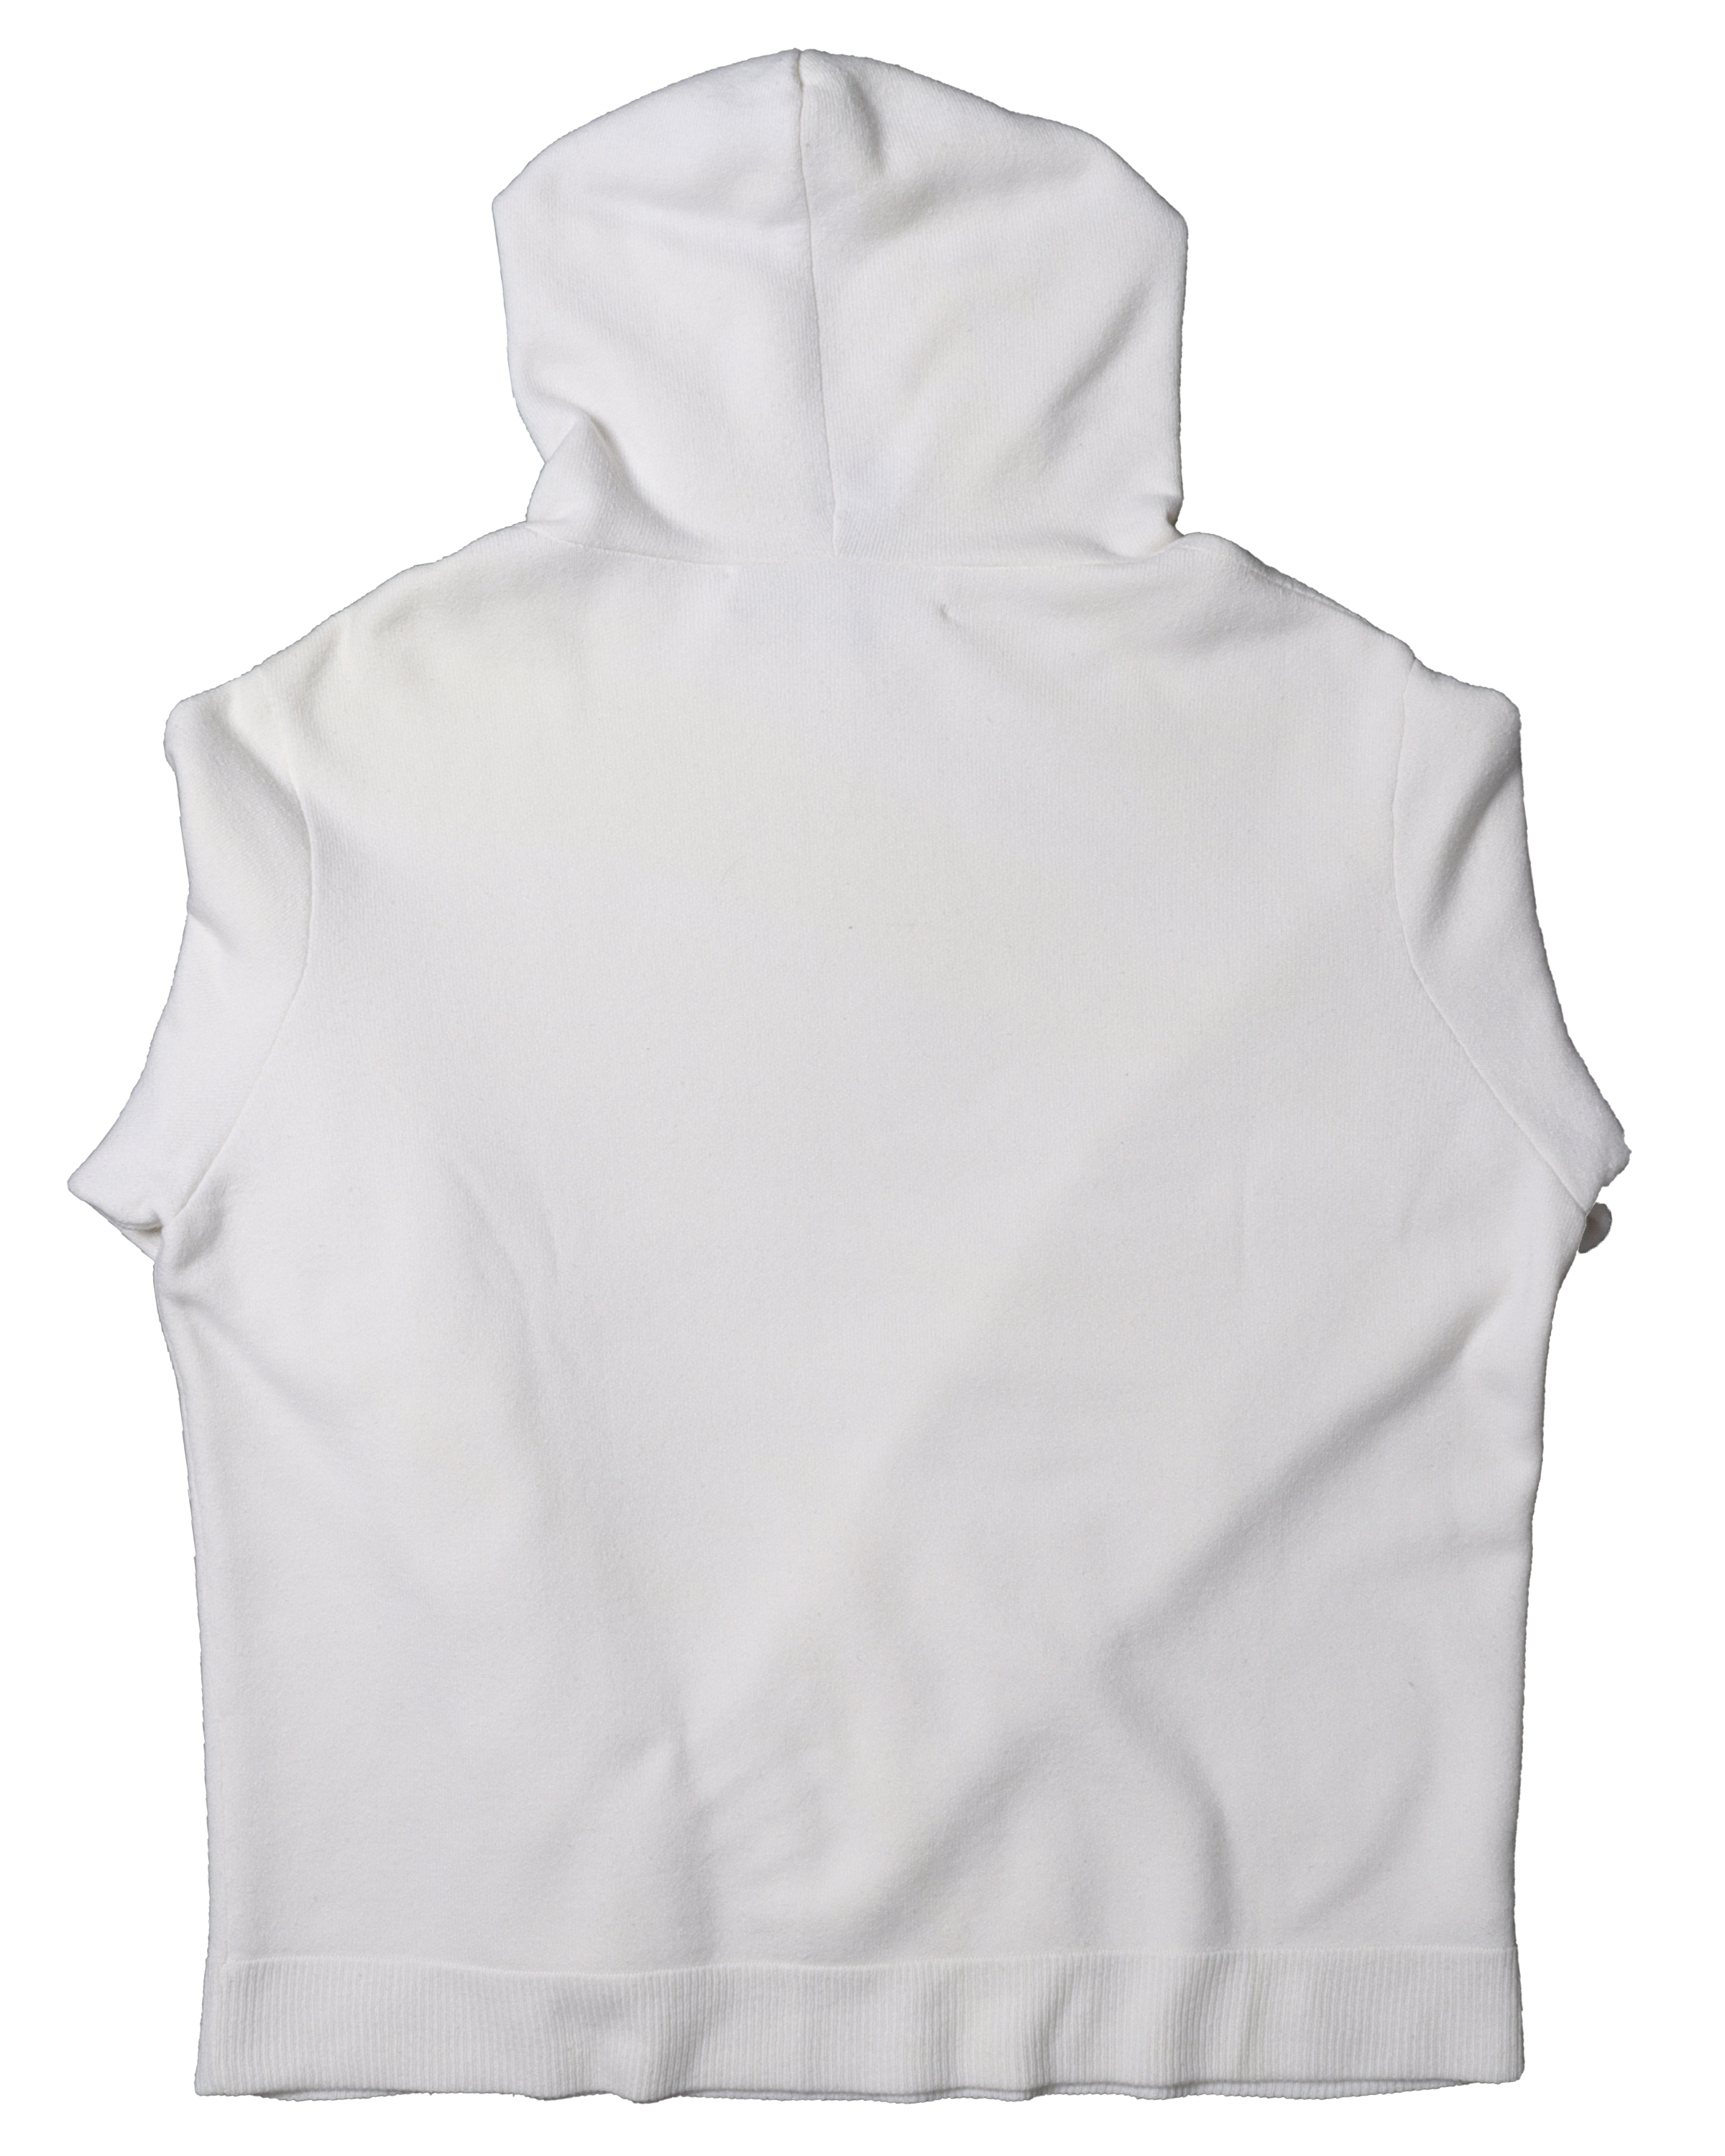 Embroidered Cashmere Hoodie